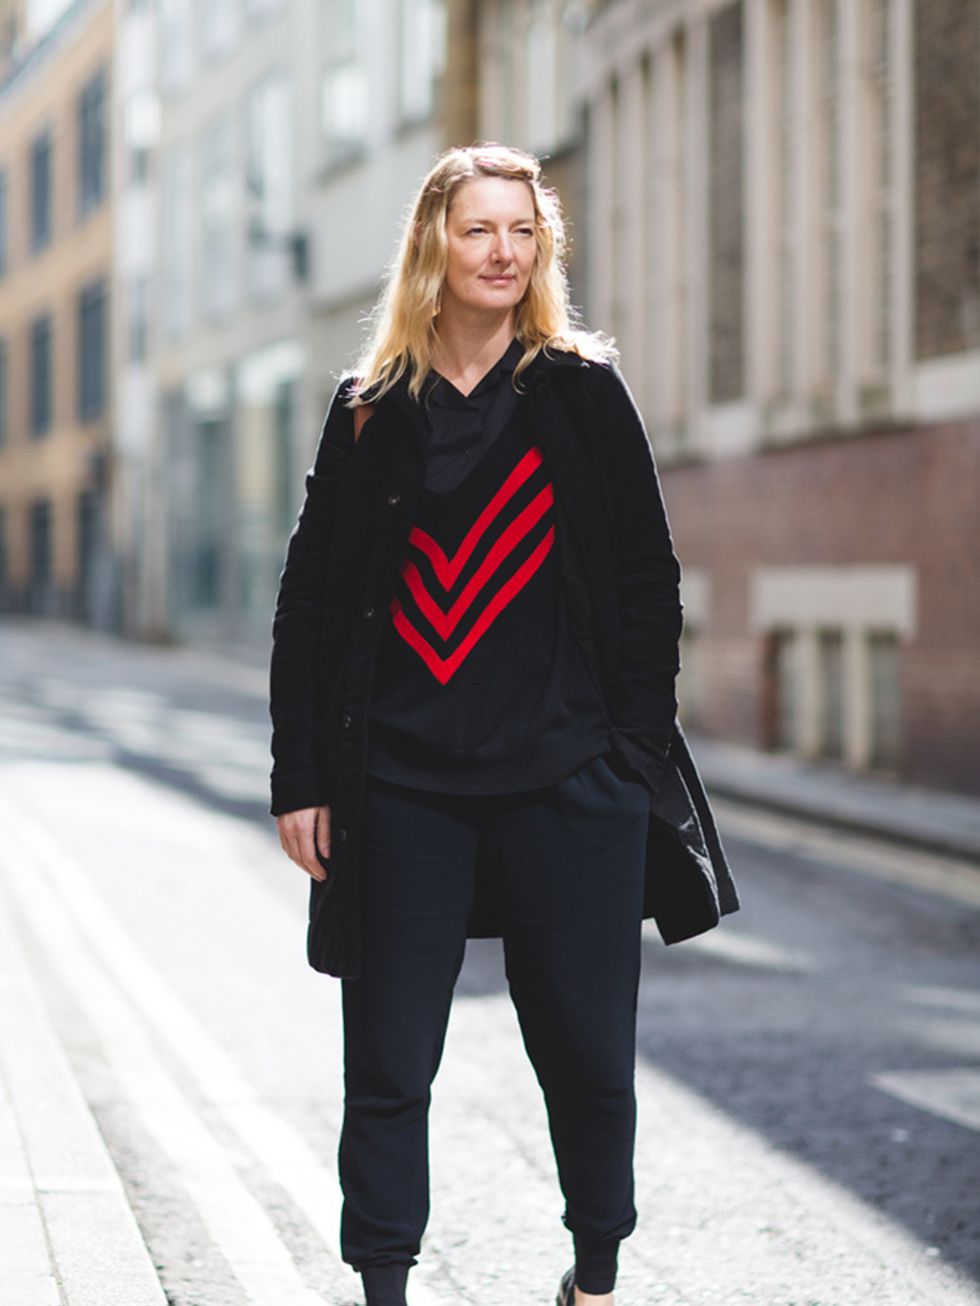 <p>Rebecca Lowthorpe<br />
Assistant Editor/Editor ELLE Collections</p>

<p>Rick Owens coat, Prada jumper, Stella McCartney trousers and Gucci shoes.</p>

<p> </p>